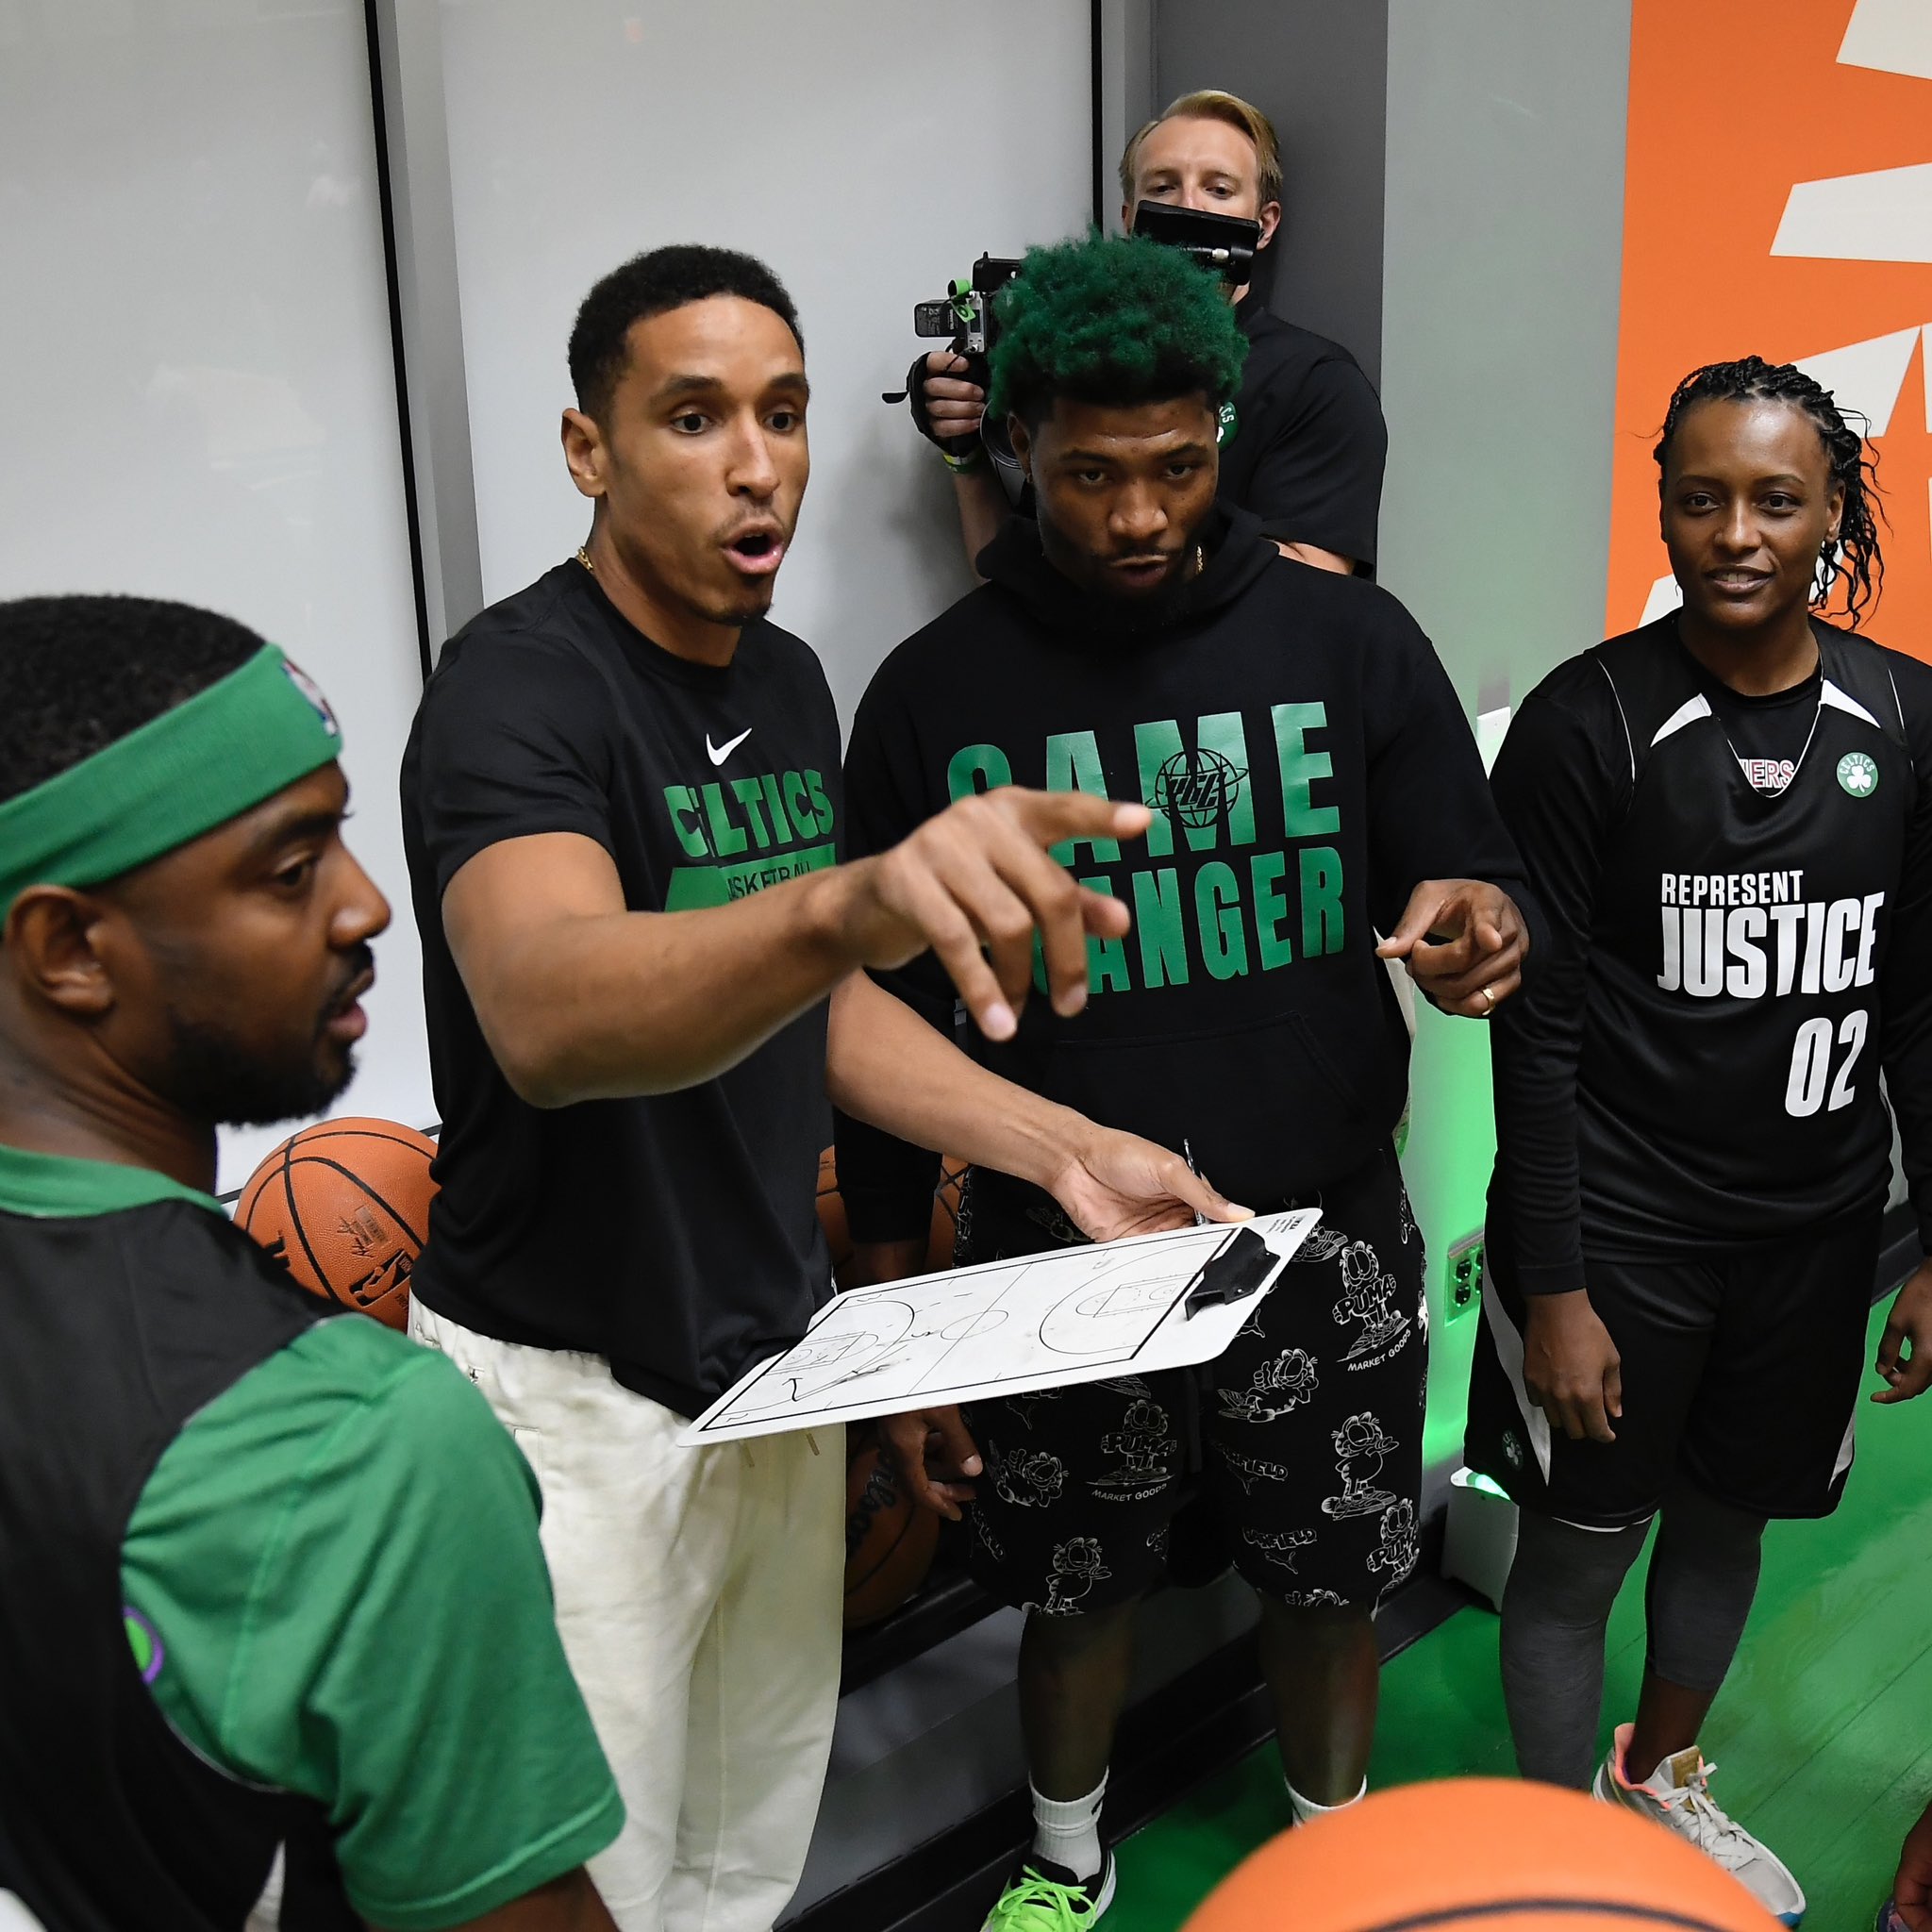 Boston Celtics on X: "#PlayForJustice is a Represent Justice program, produced by @plusonesociety_. The program creates a transformational experience that brings attention to the need for a fair legal system, dignity for